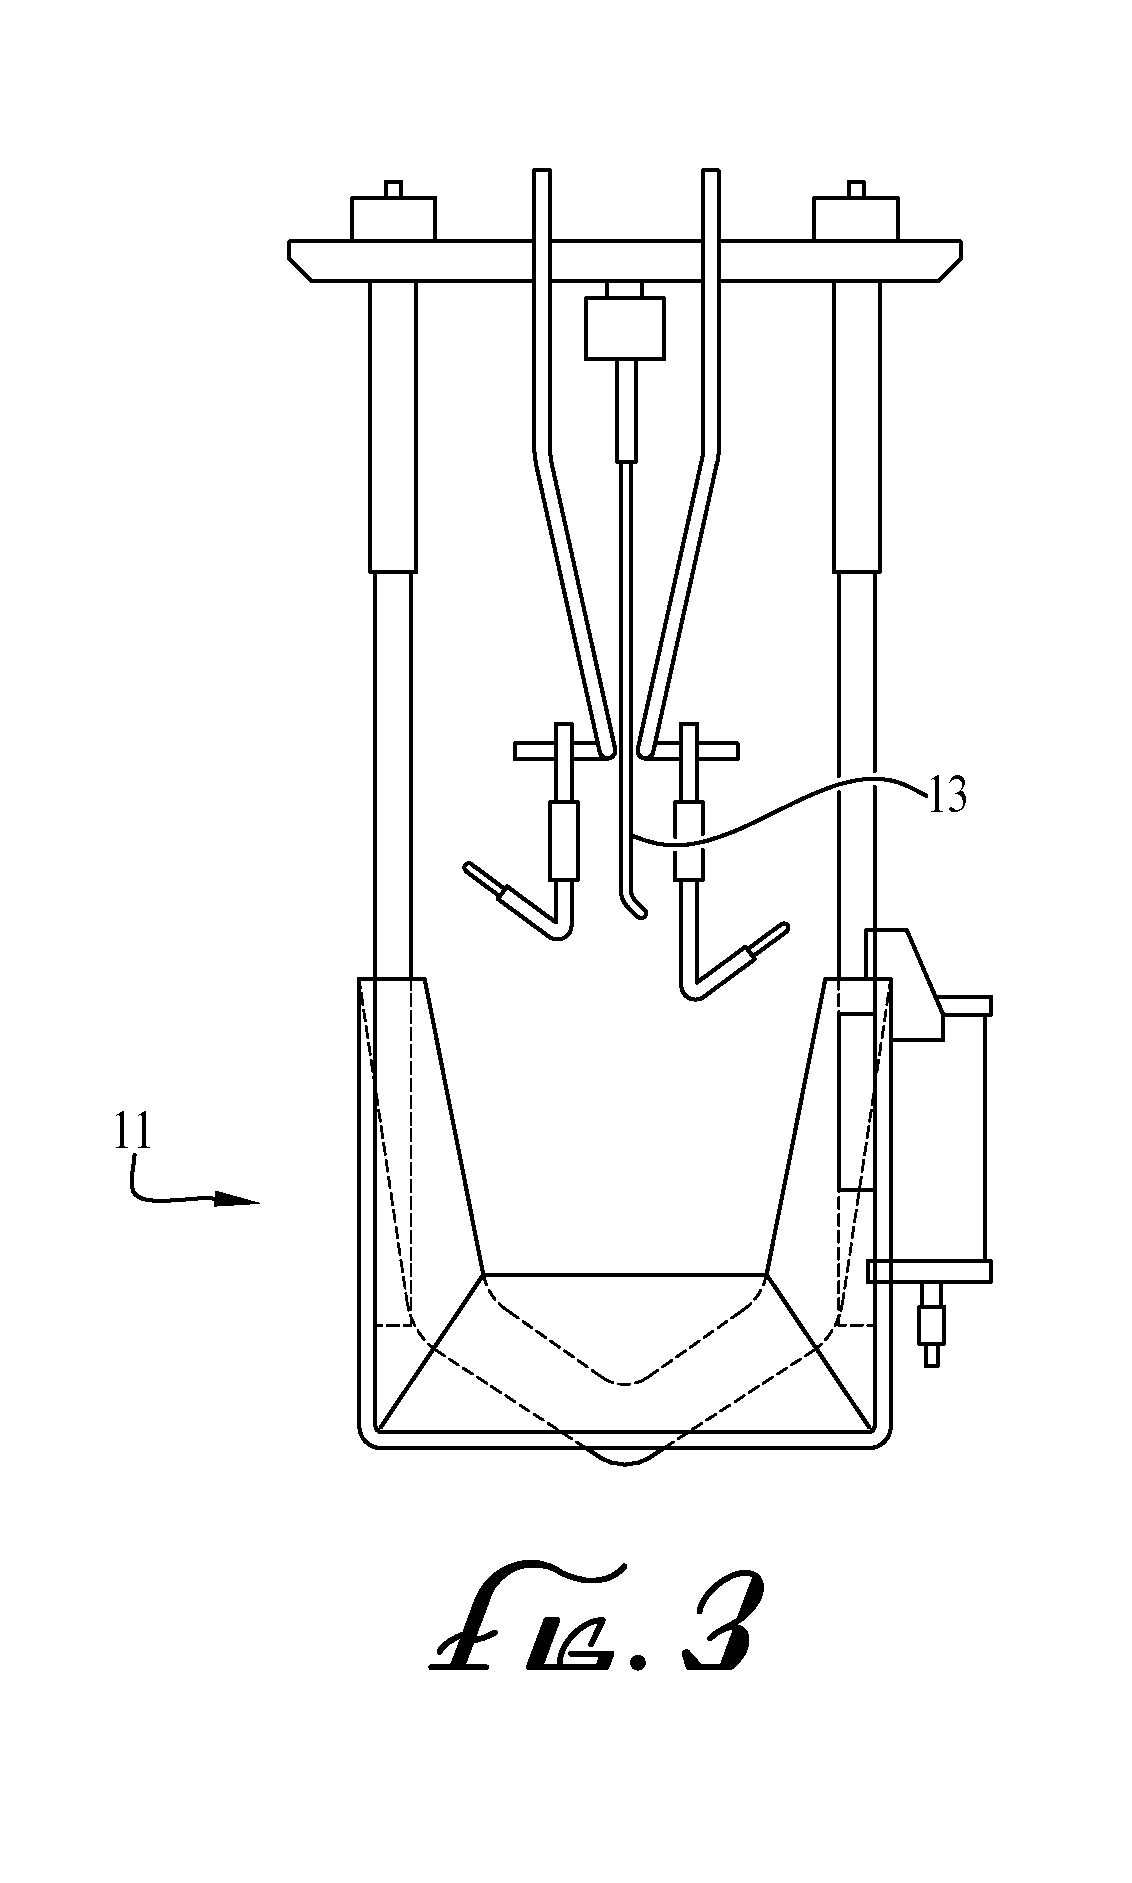 Direct current/alternating current poultry stunning and immobilizing apparatus and method